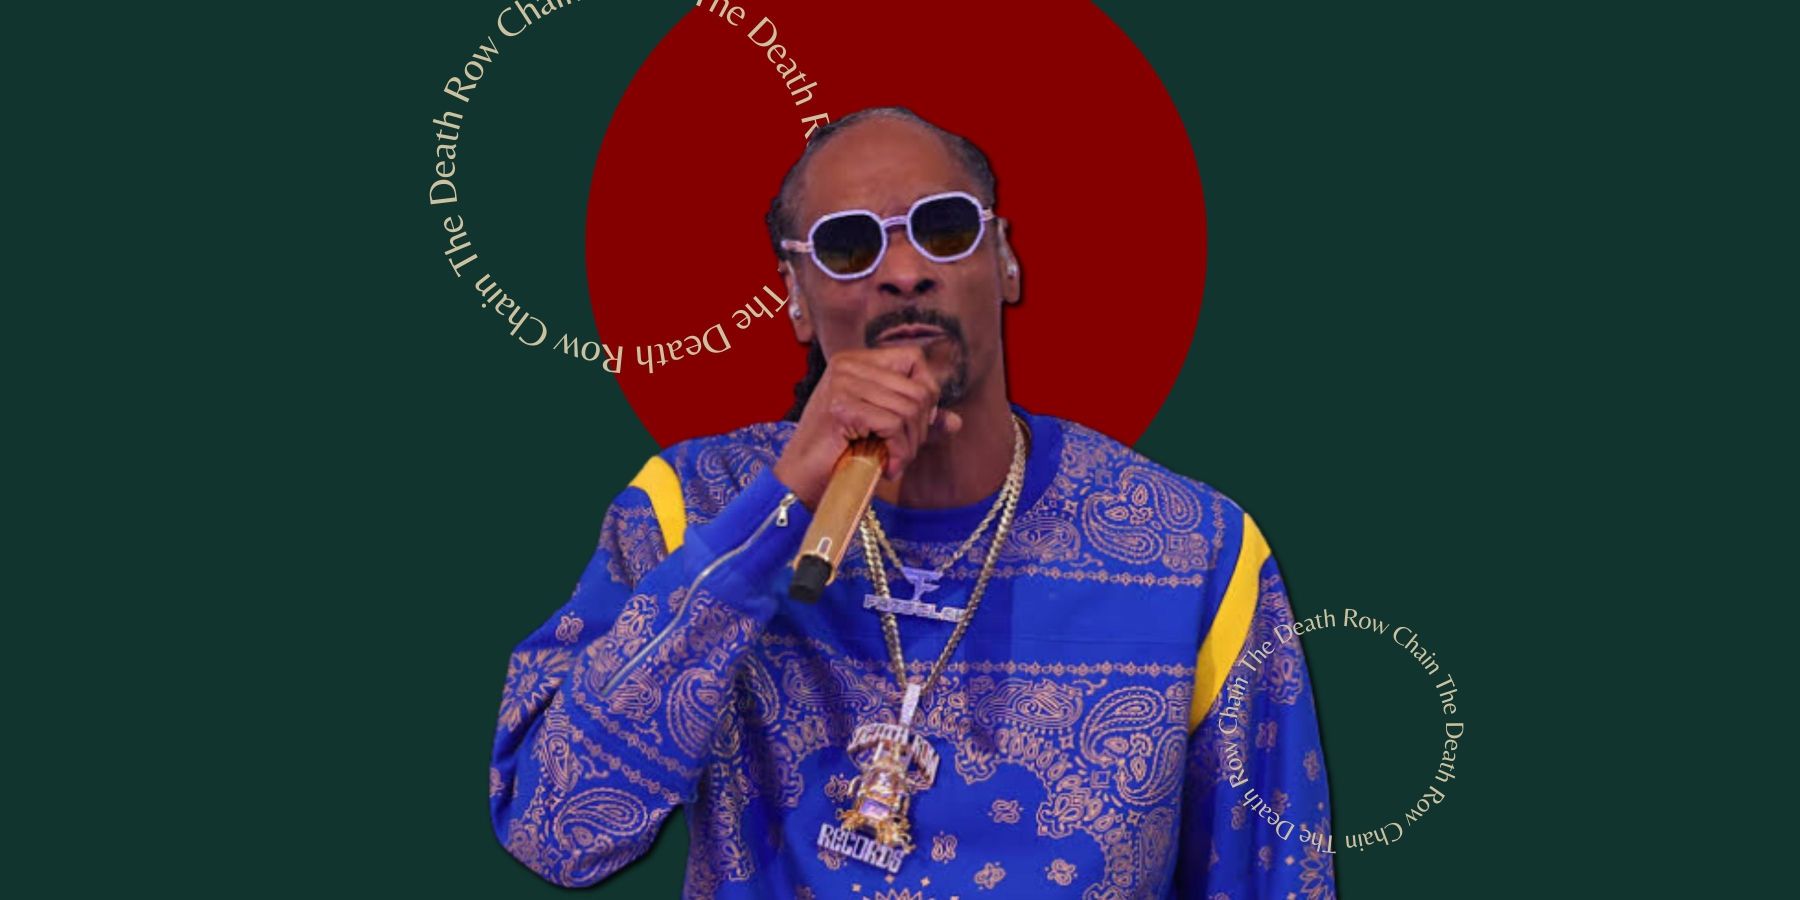 Snoop Dogg and Death Row Chains: A Legacy in Hip-Hop Bling